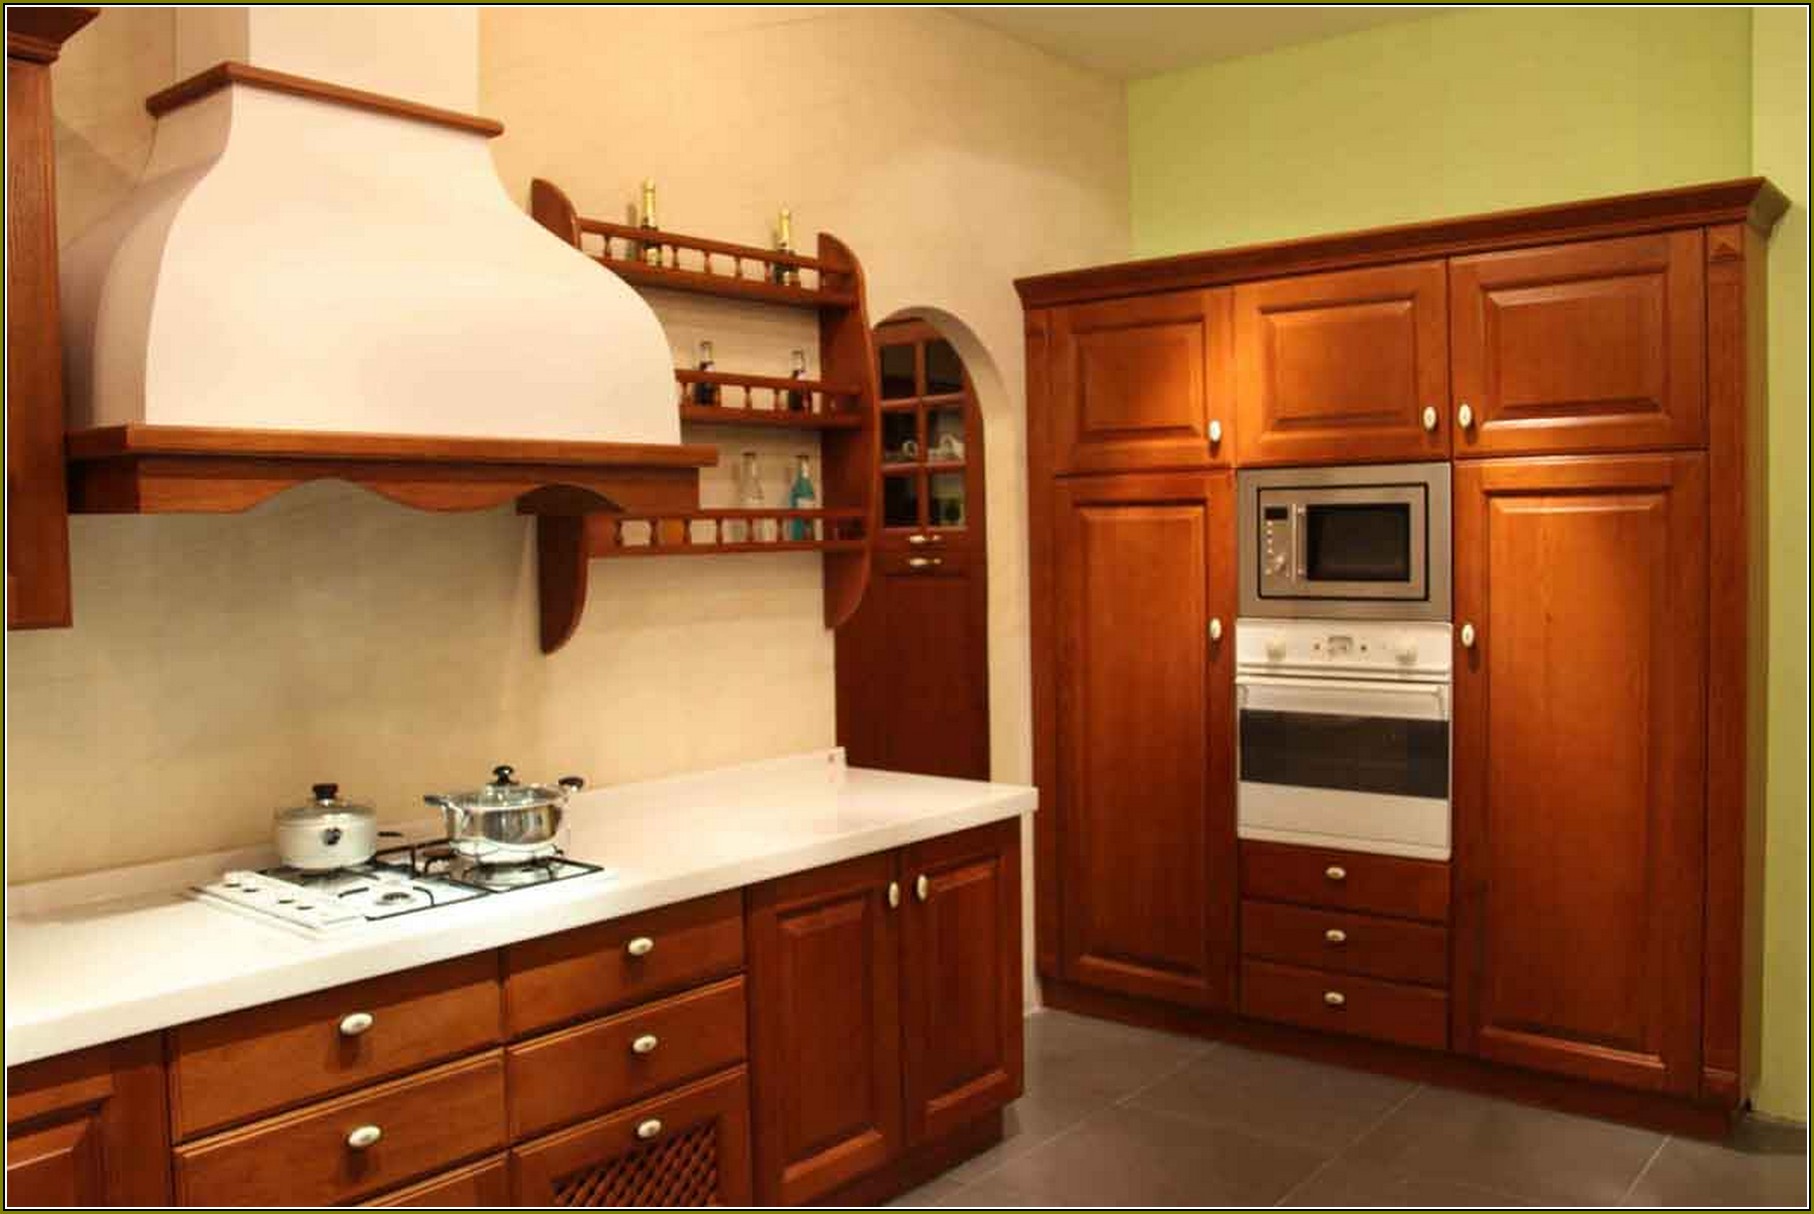 Kitchen Cabinets Refinishing Do It Yourself